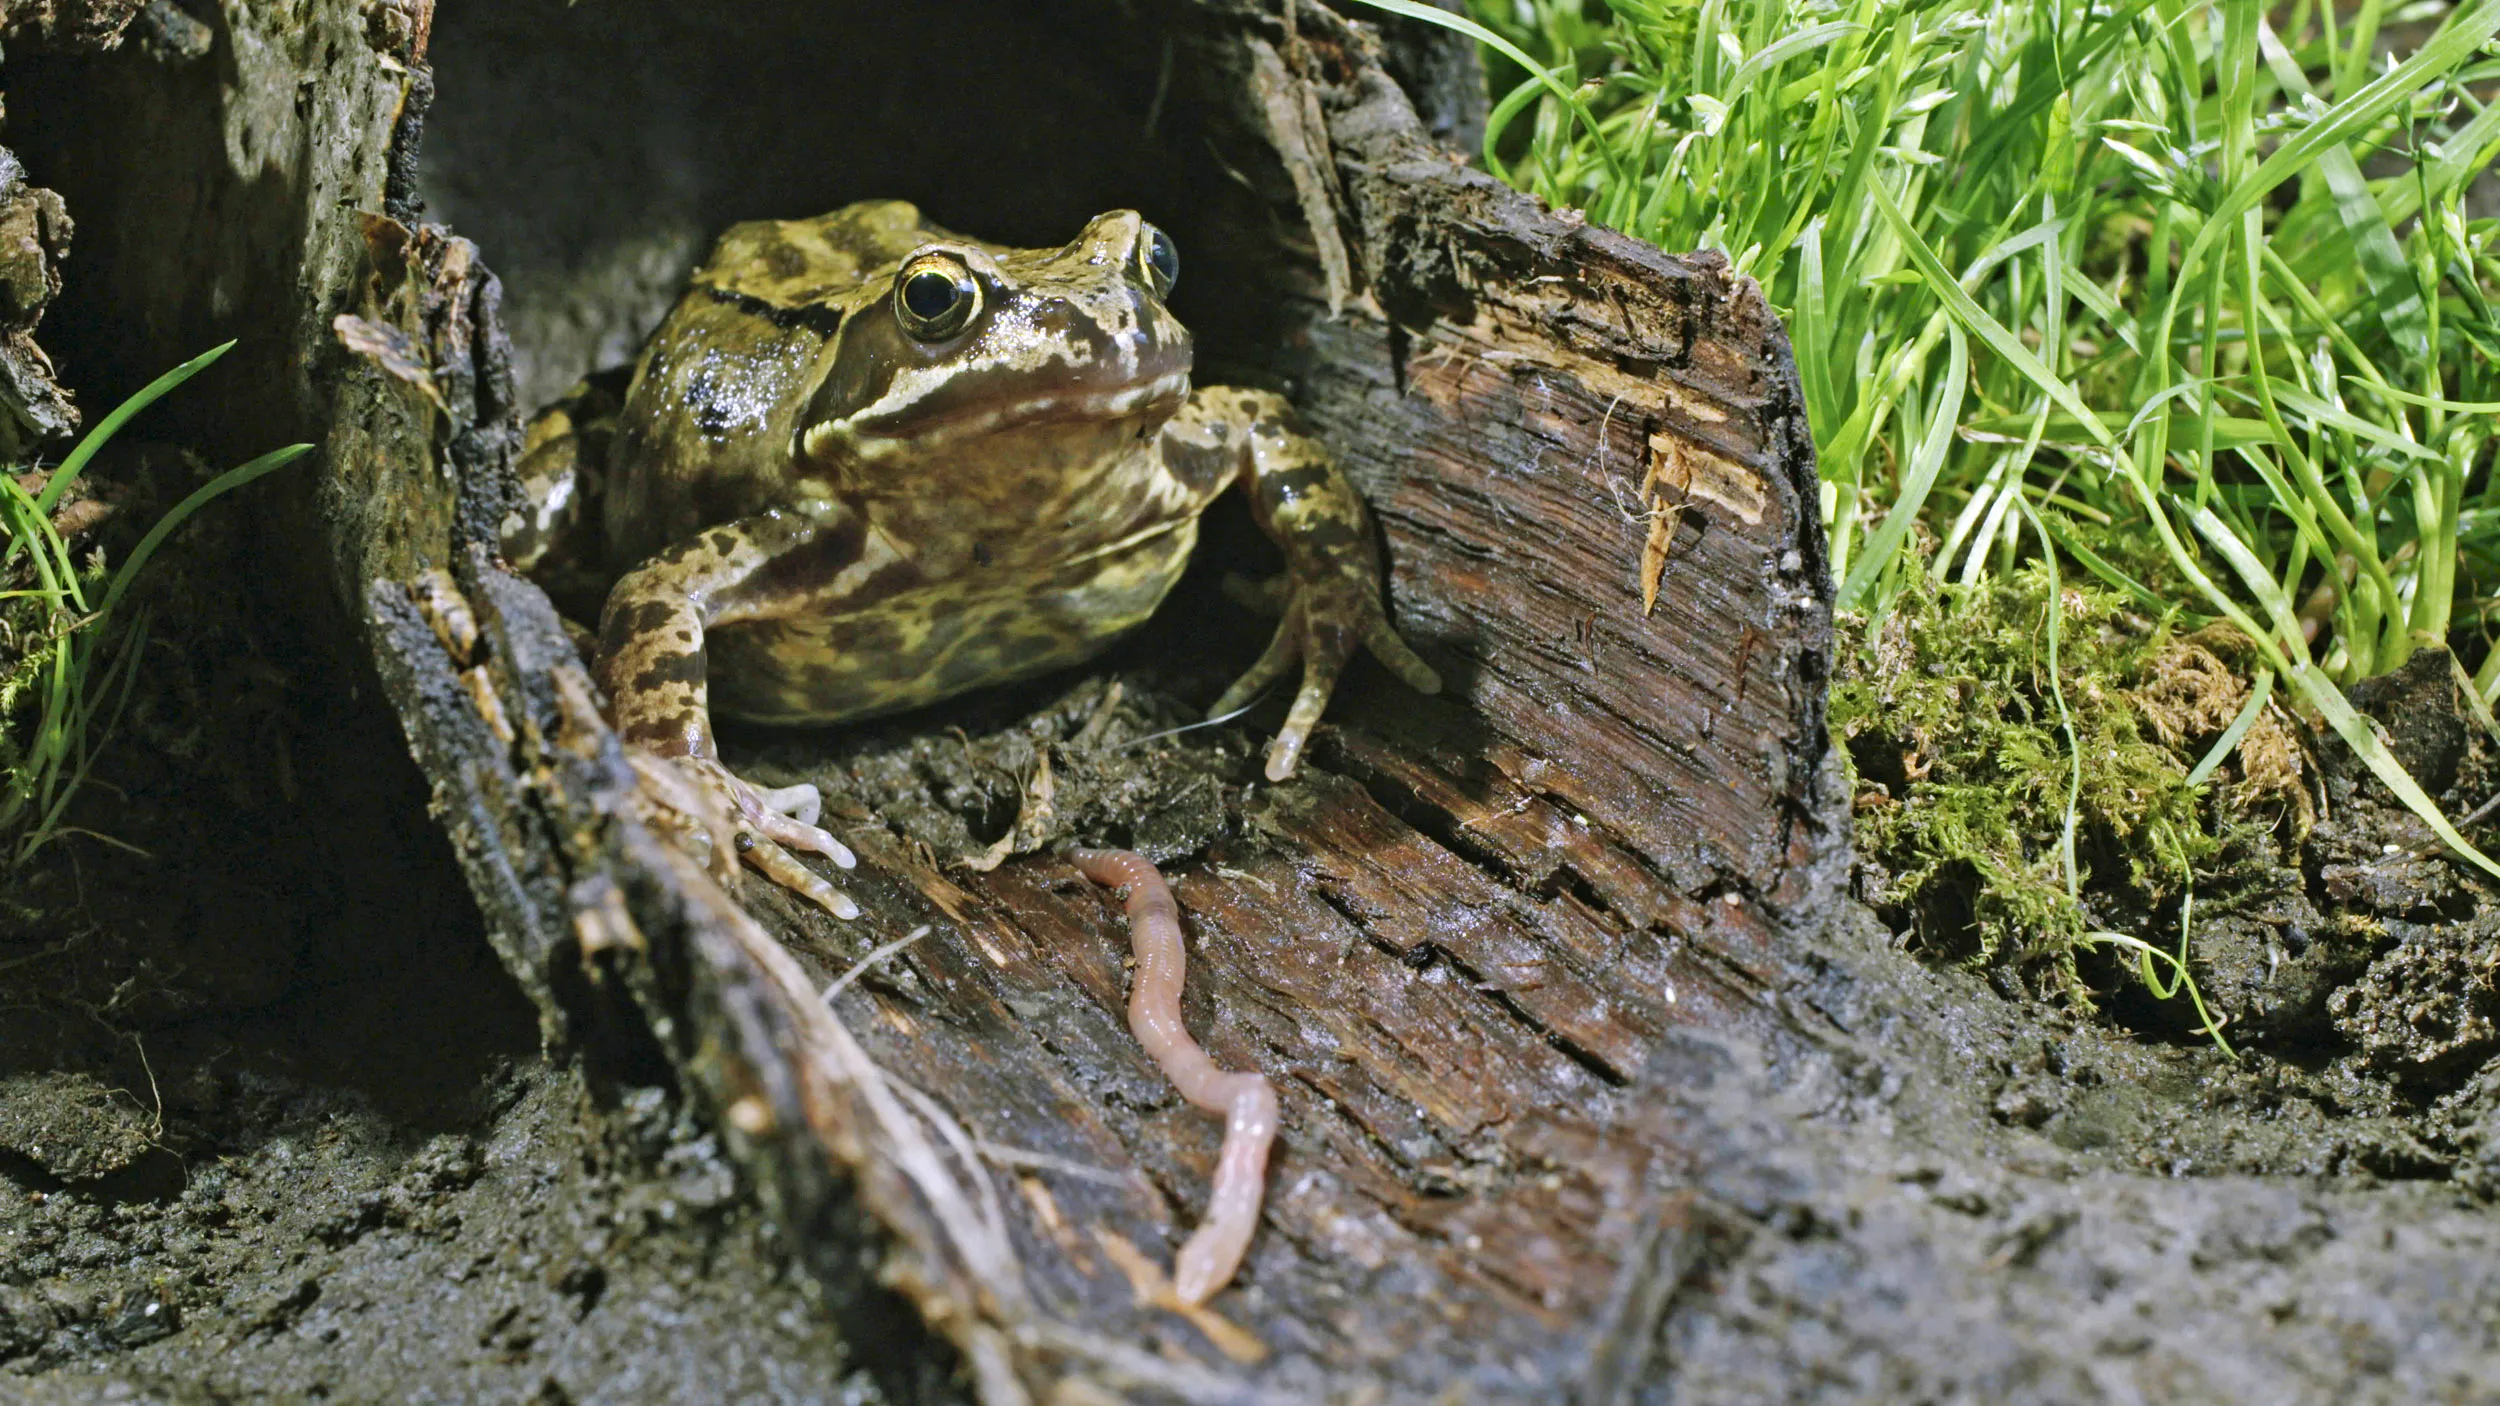 A Common Frog sat in a hollowed out, damp log, with a long worm in front of it.